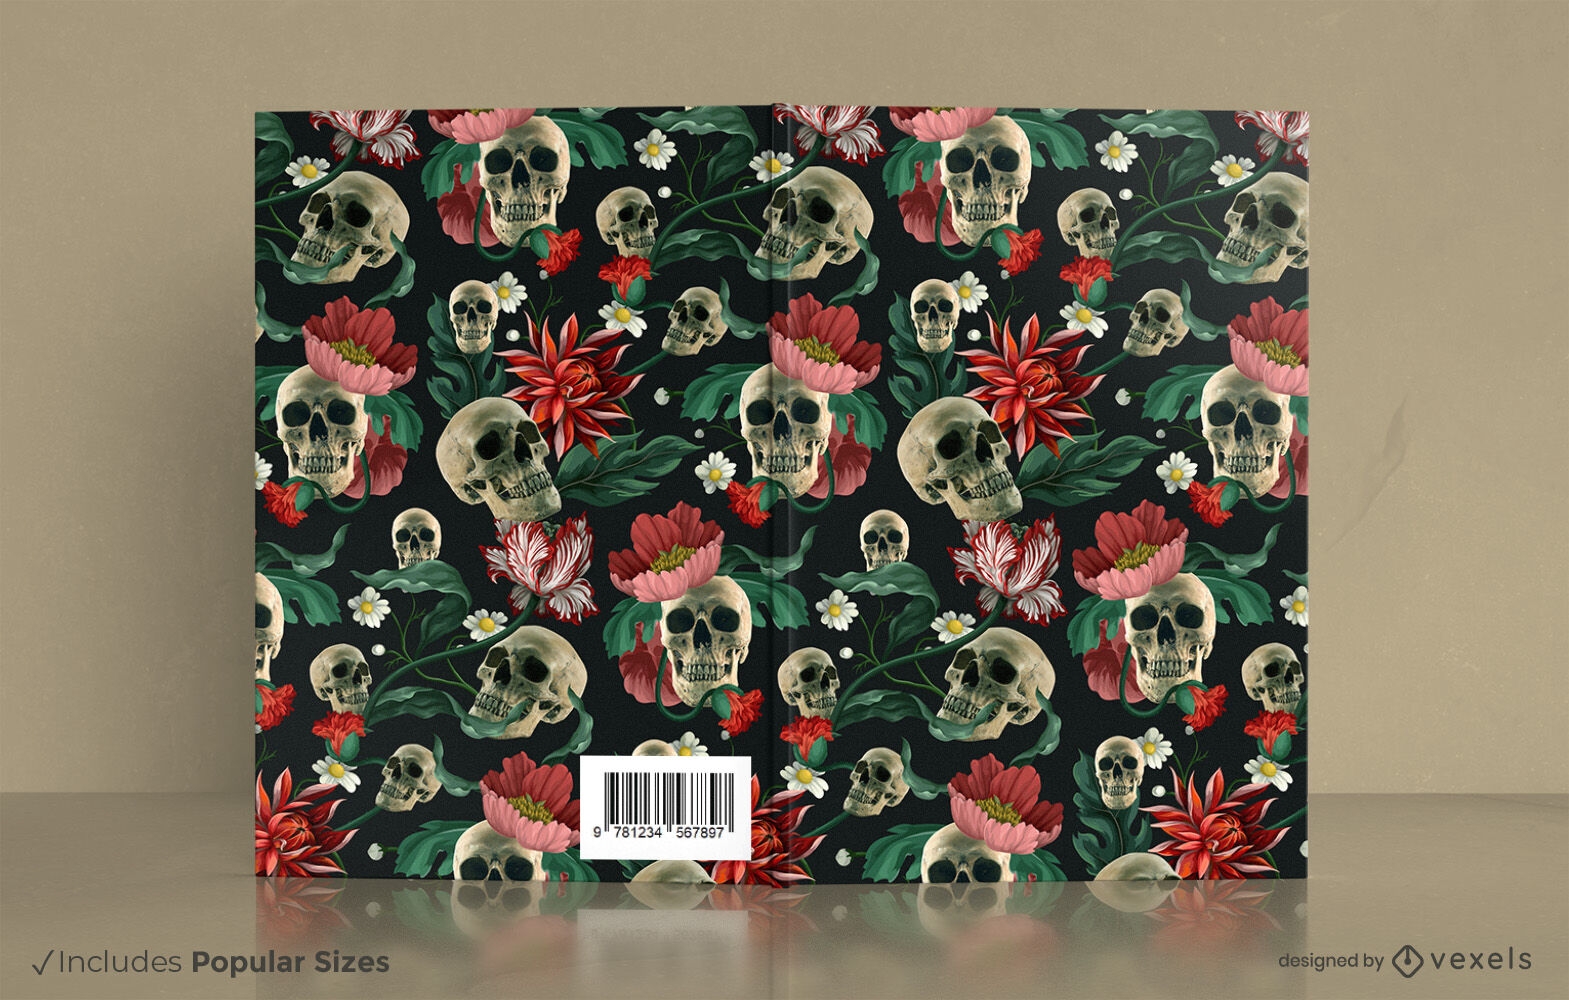 Skulls and flowers book cover design